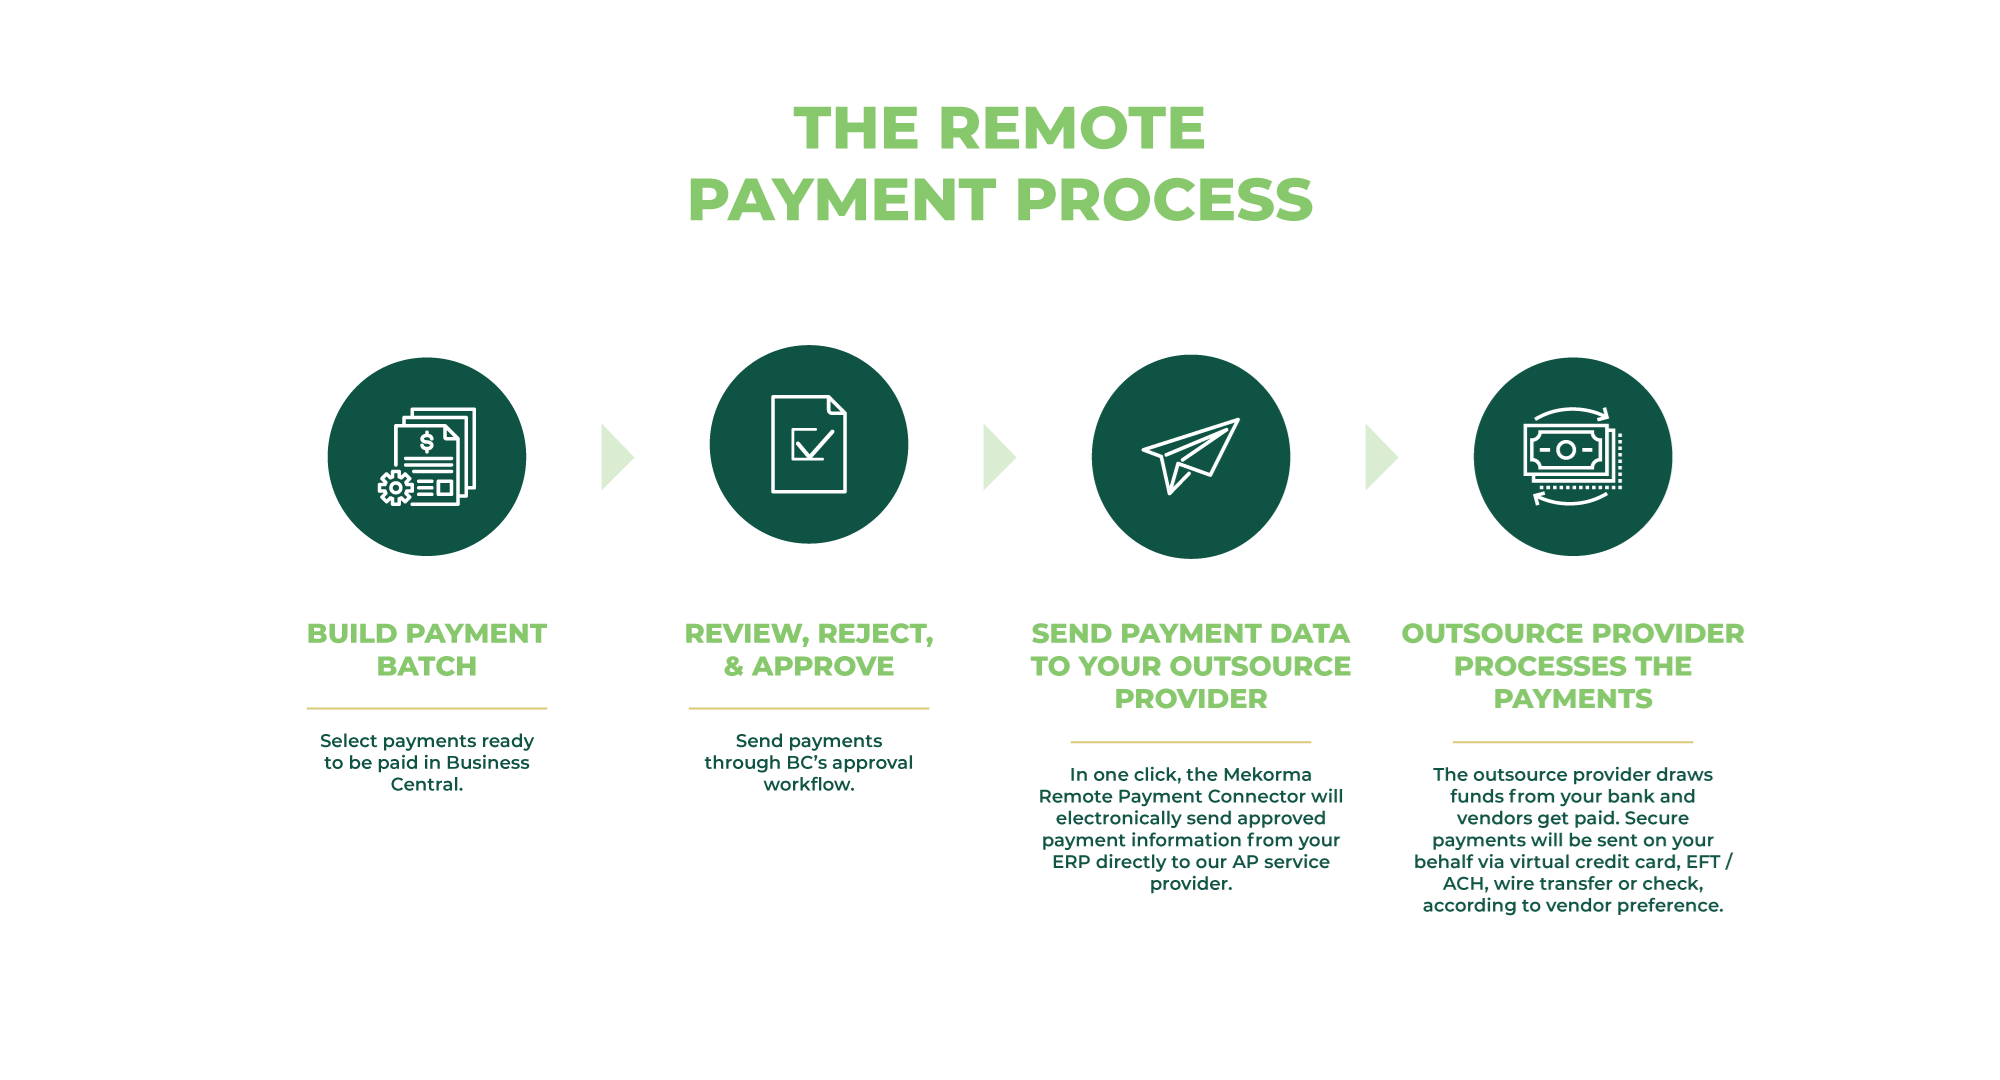 The Remote Payment Process